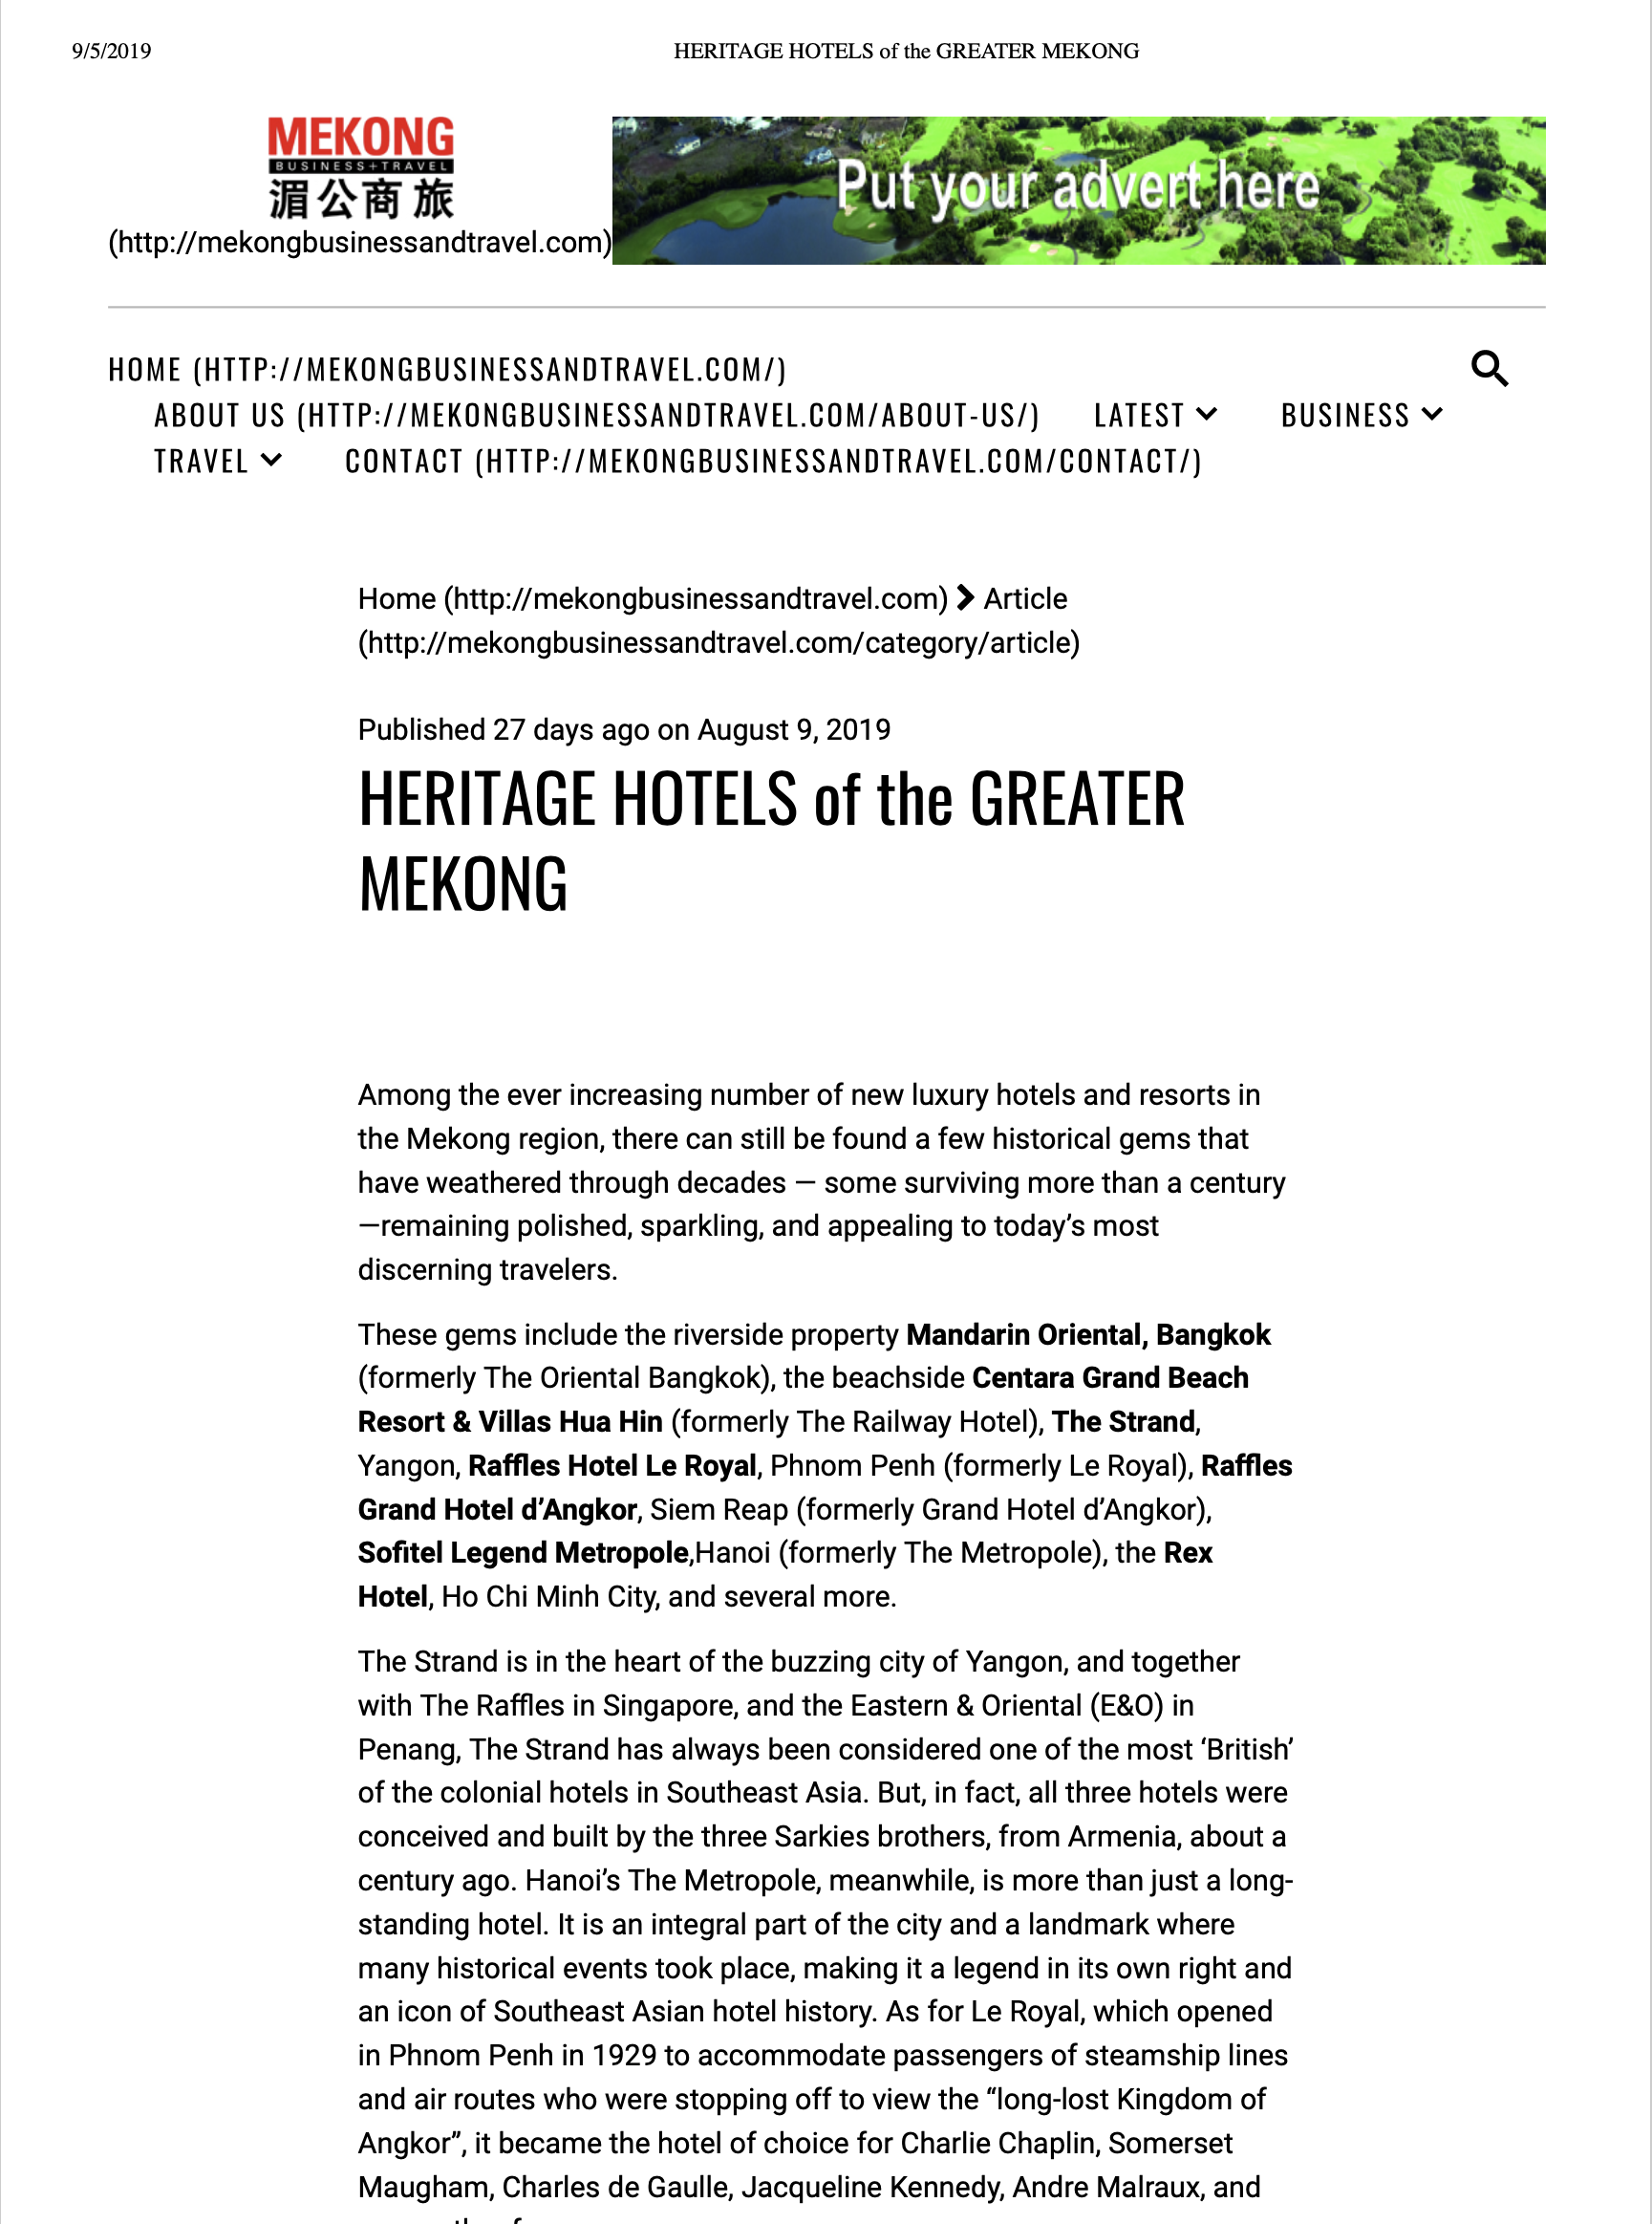 HERITAGE HOTELS of the GREATER MEKONG